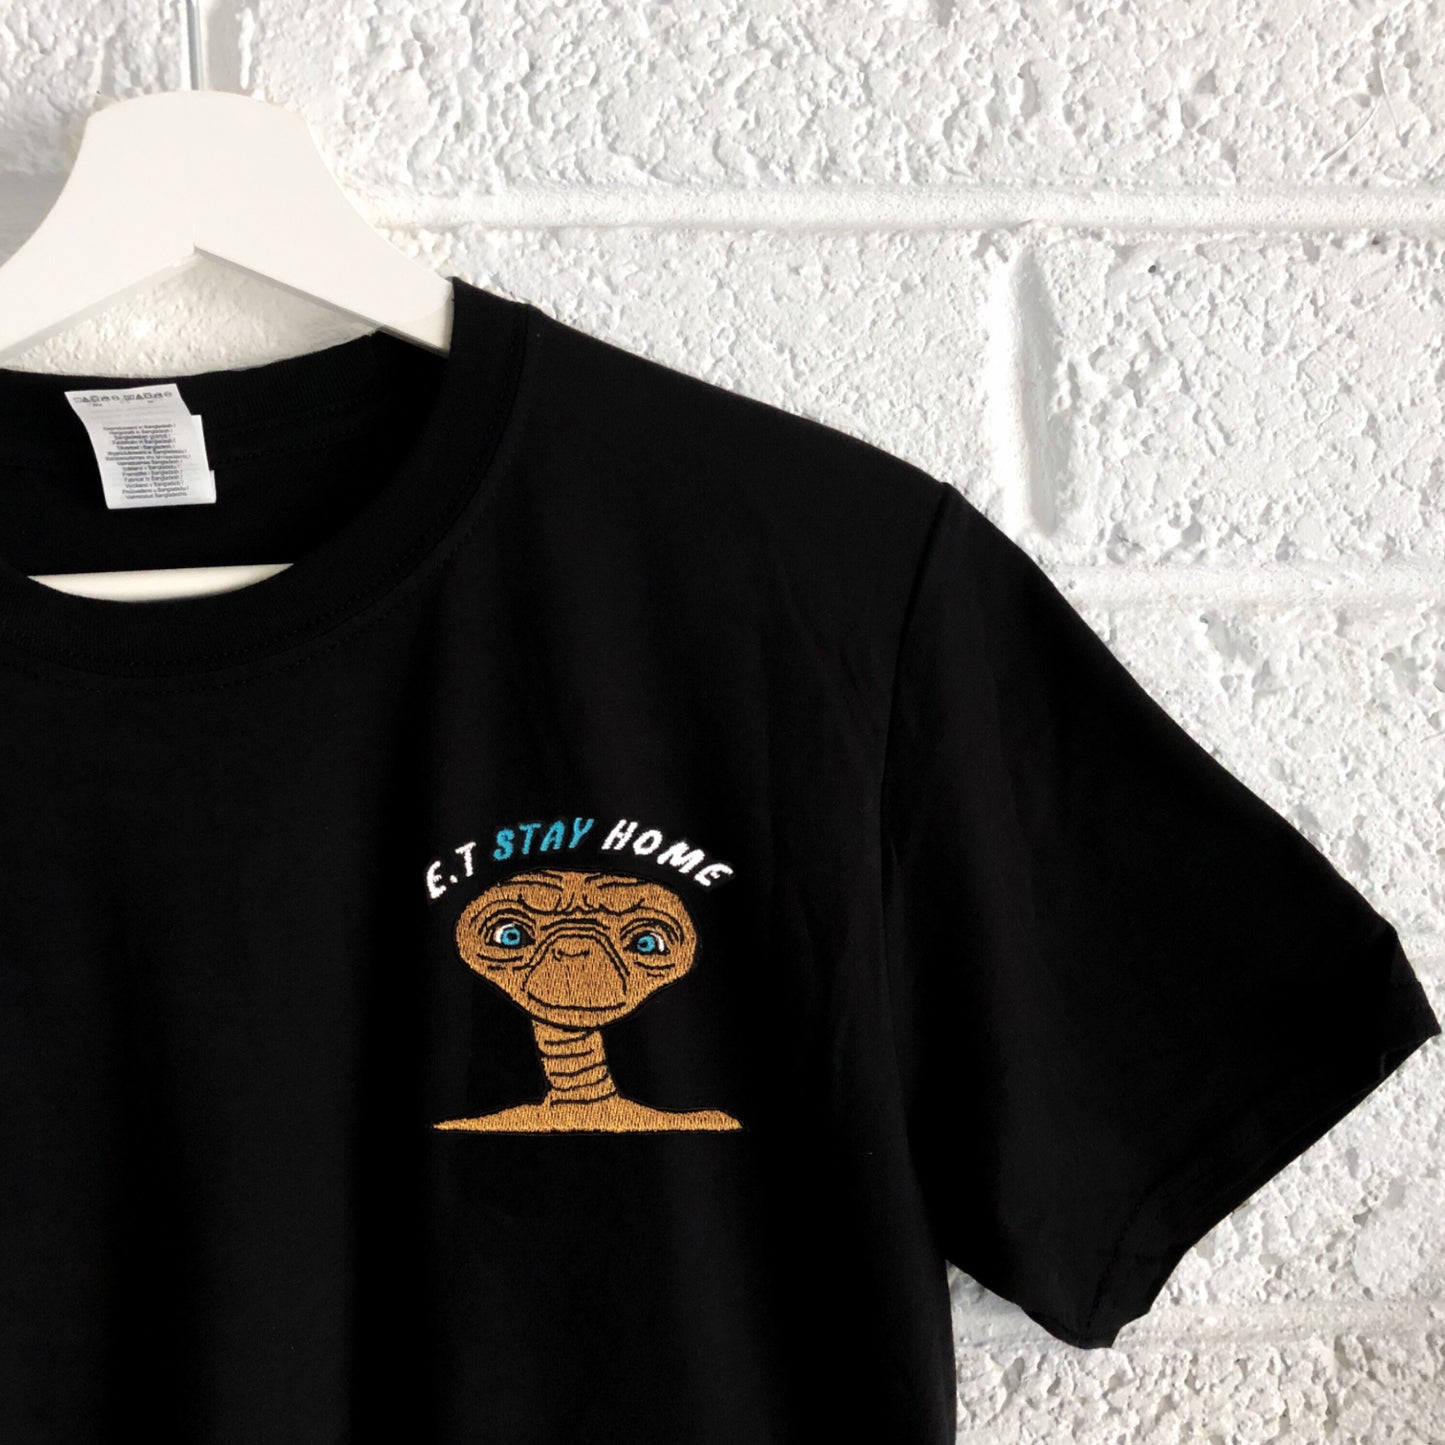 E.T Stay Home - Unisex Embroidered Print